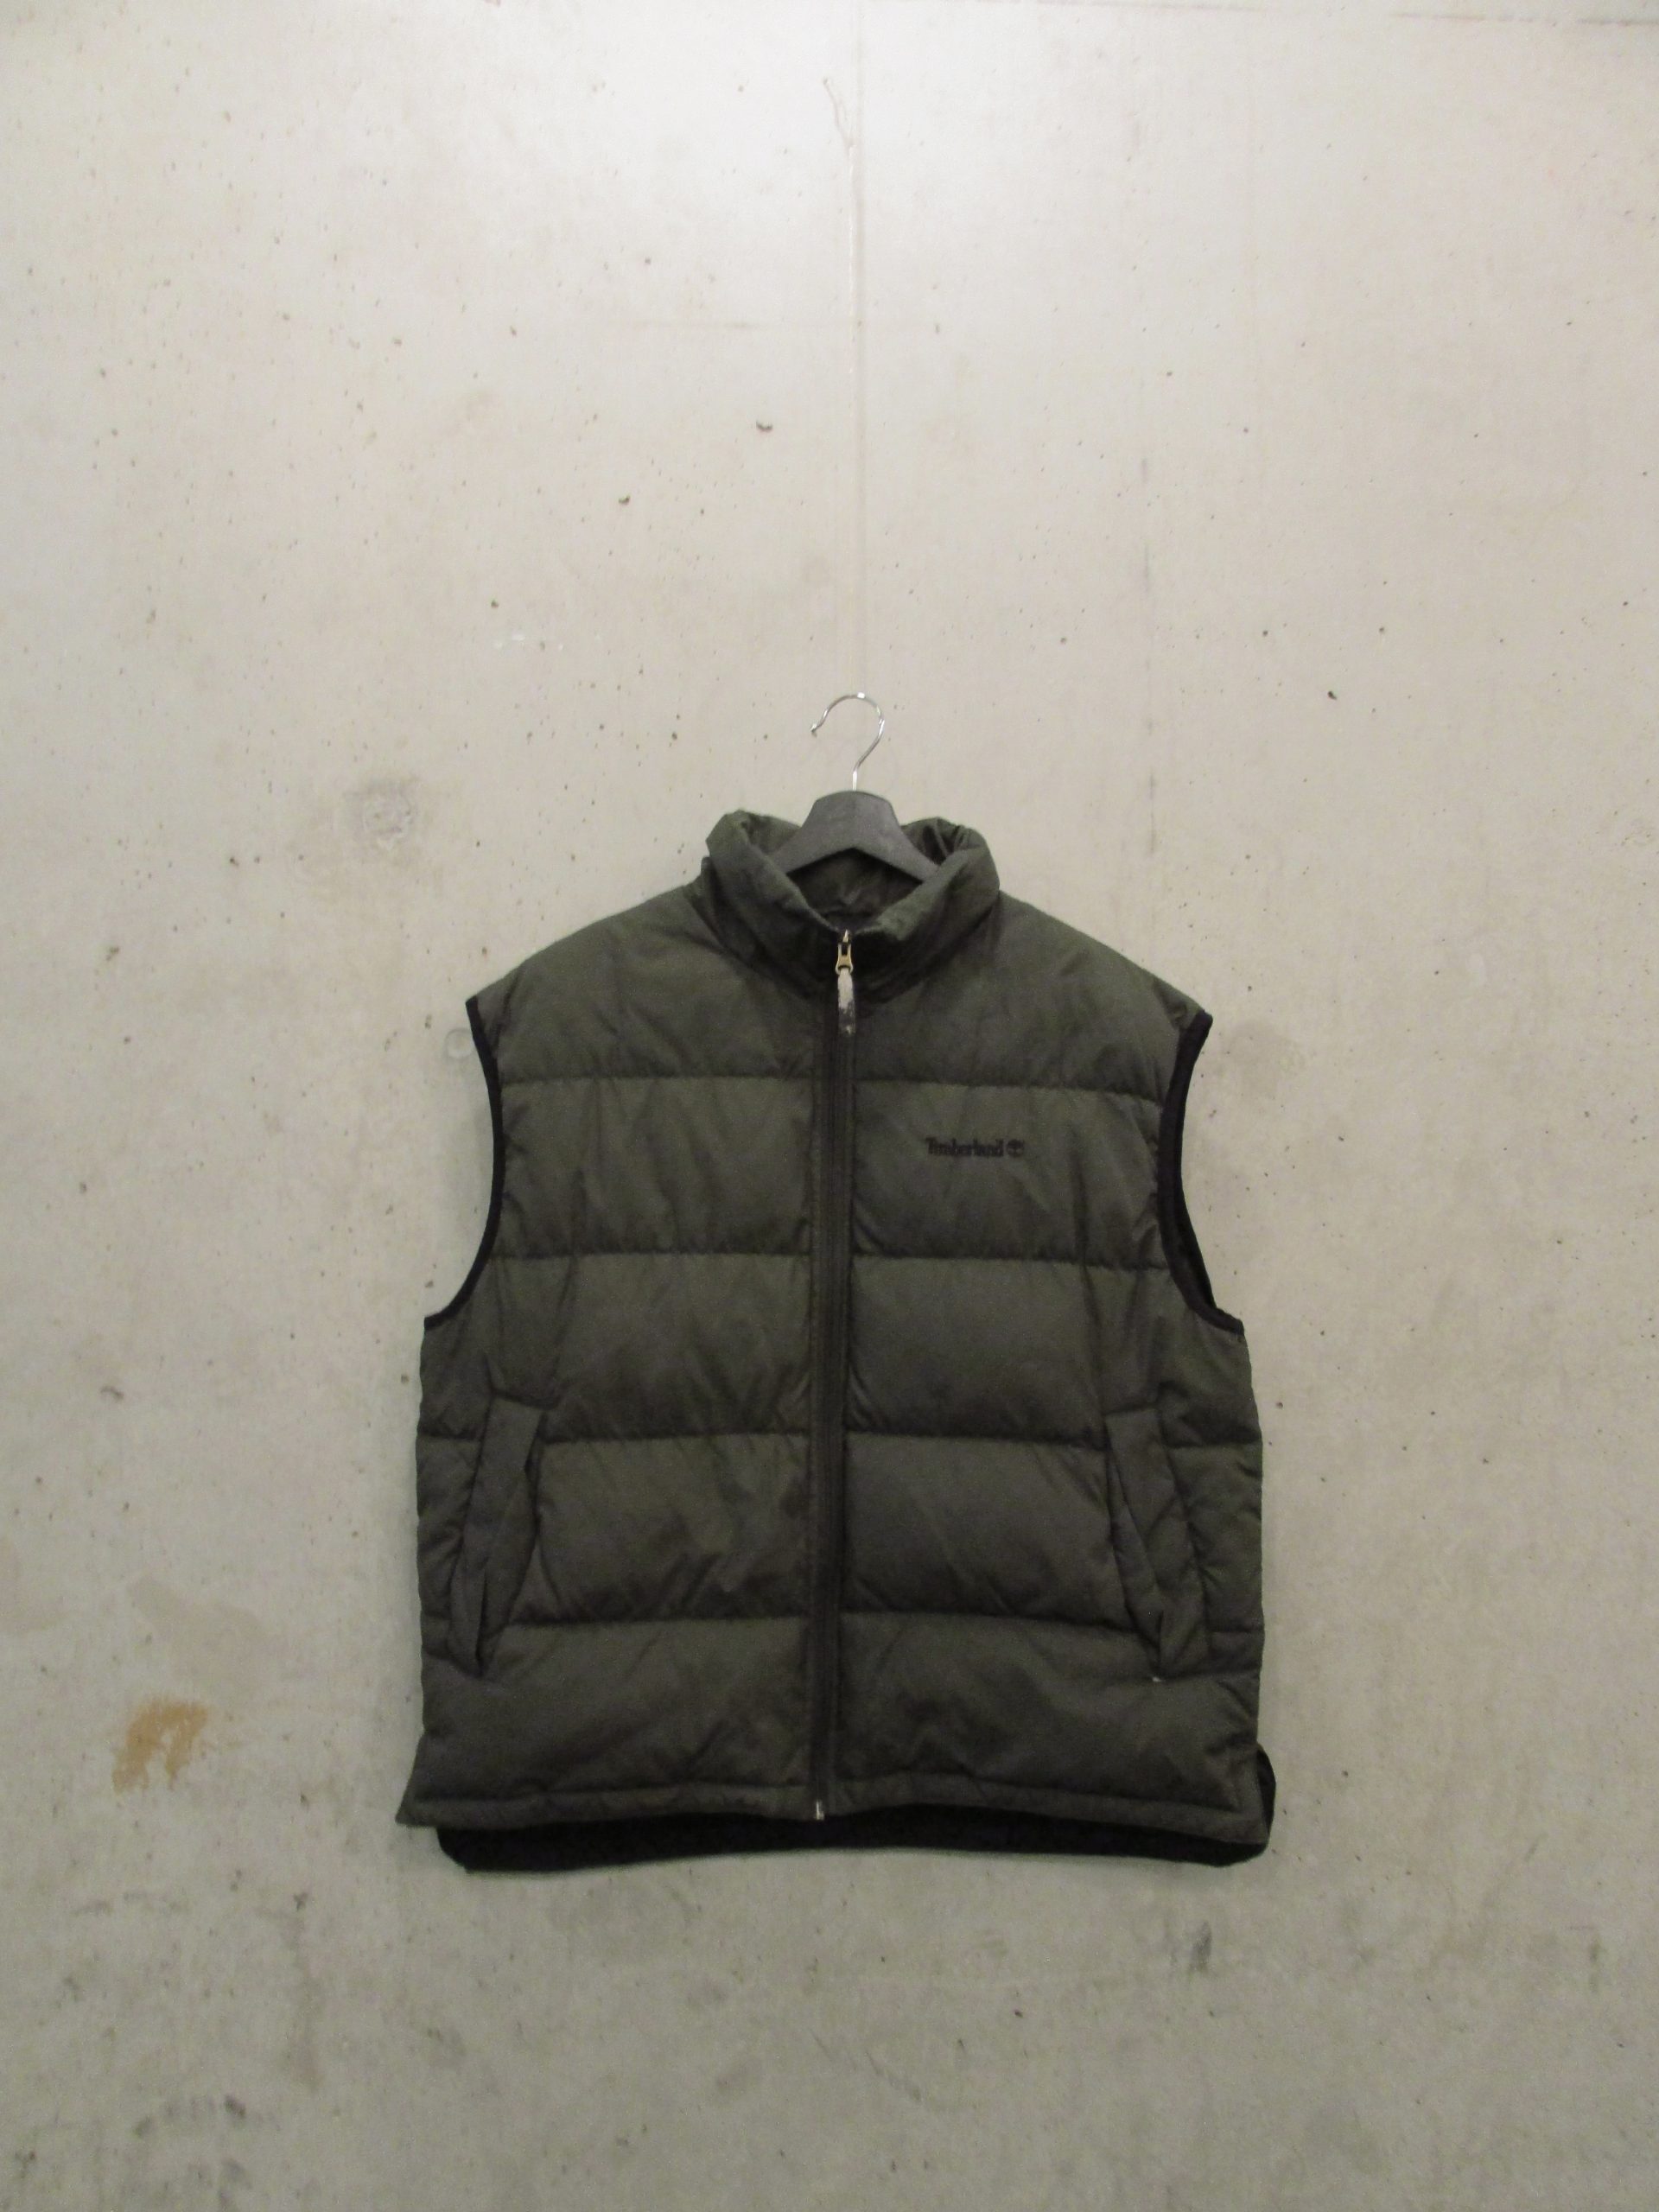 90's Timberland bodywarmer – What Now?